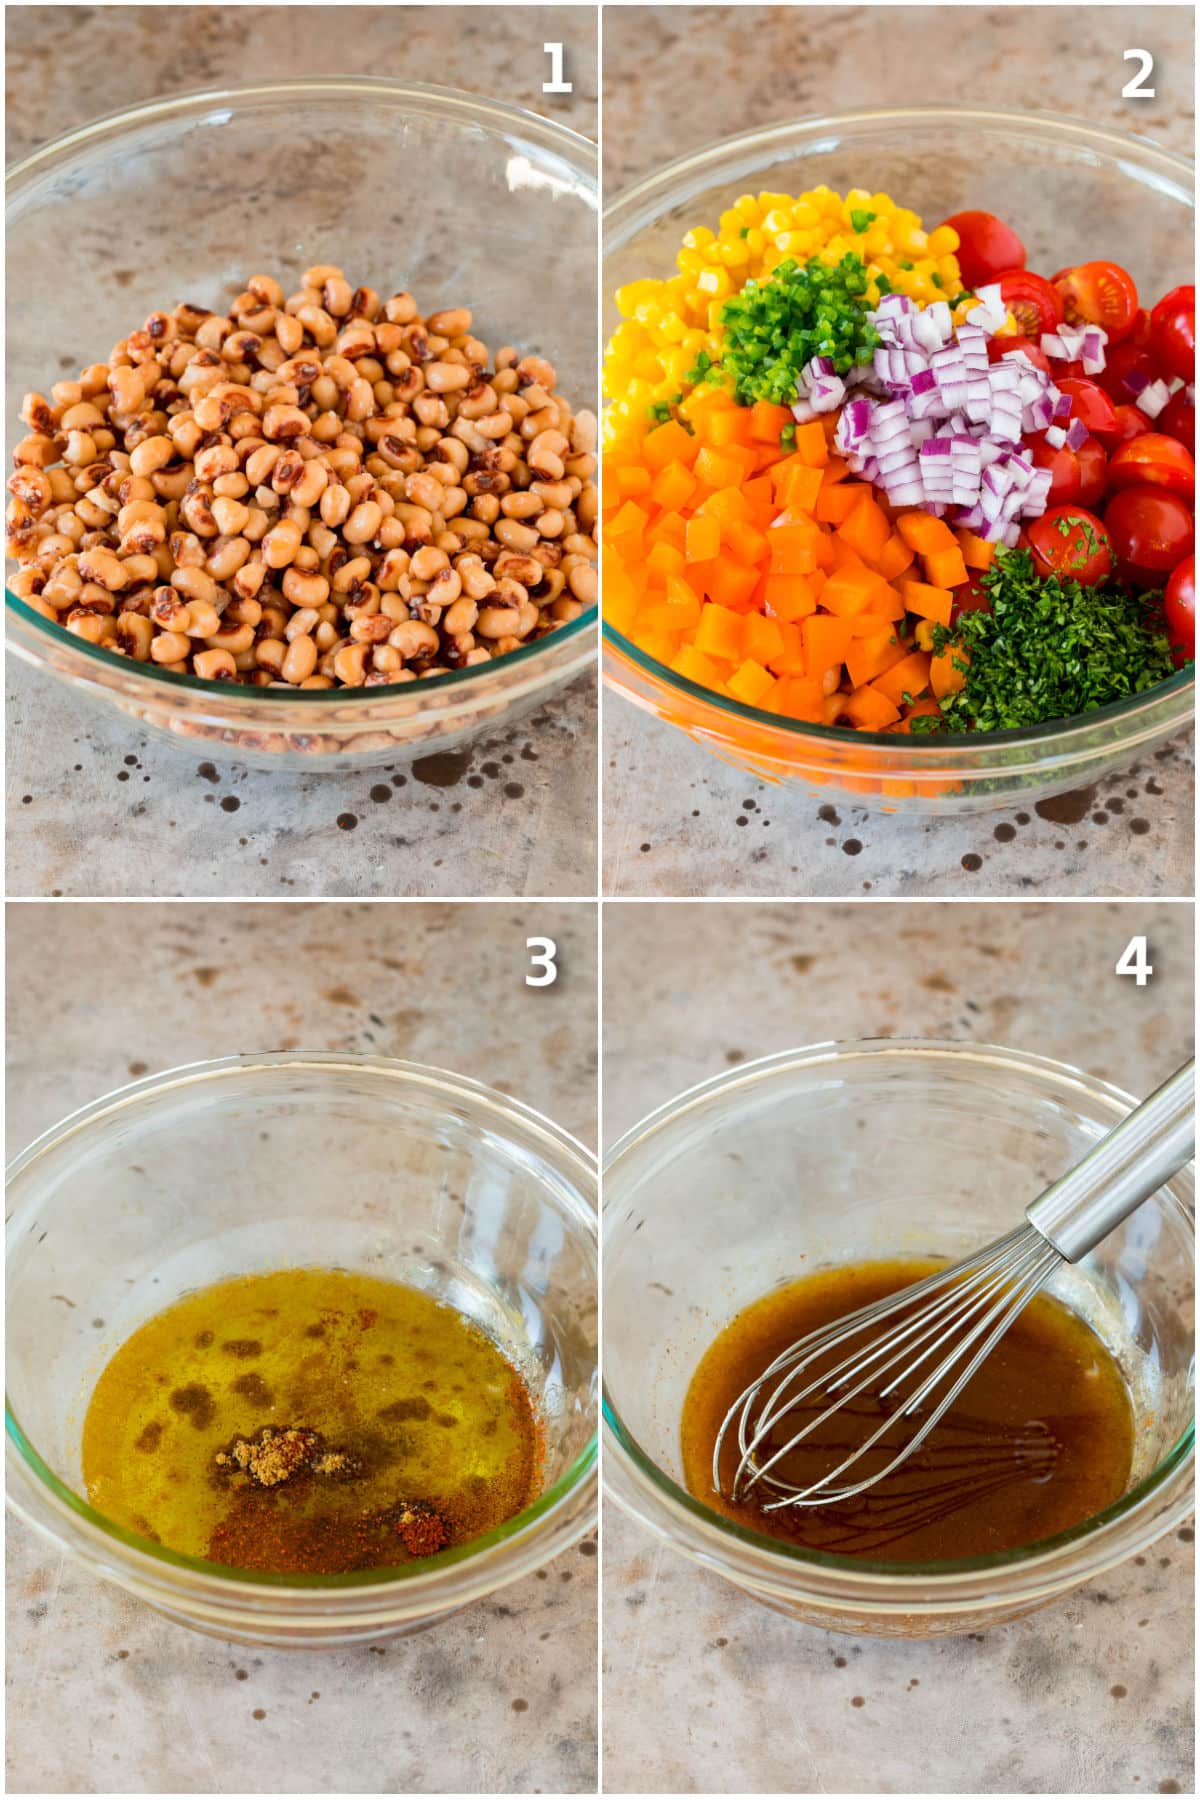 Step by step process shots showing how to make black eyed pea salad.